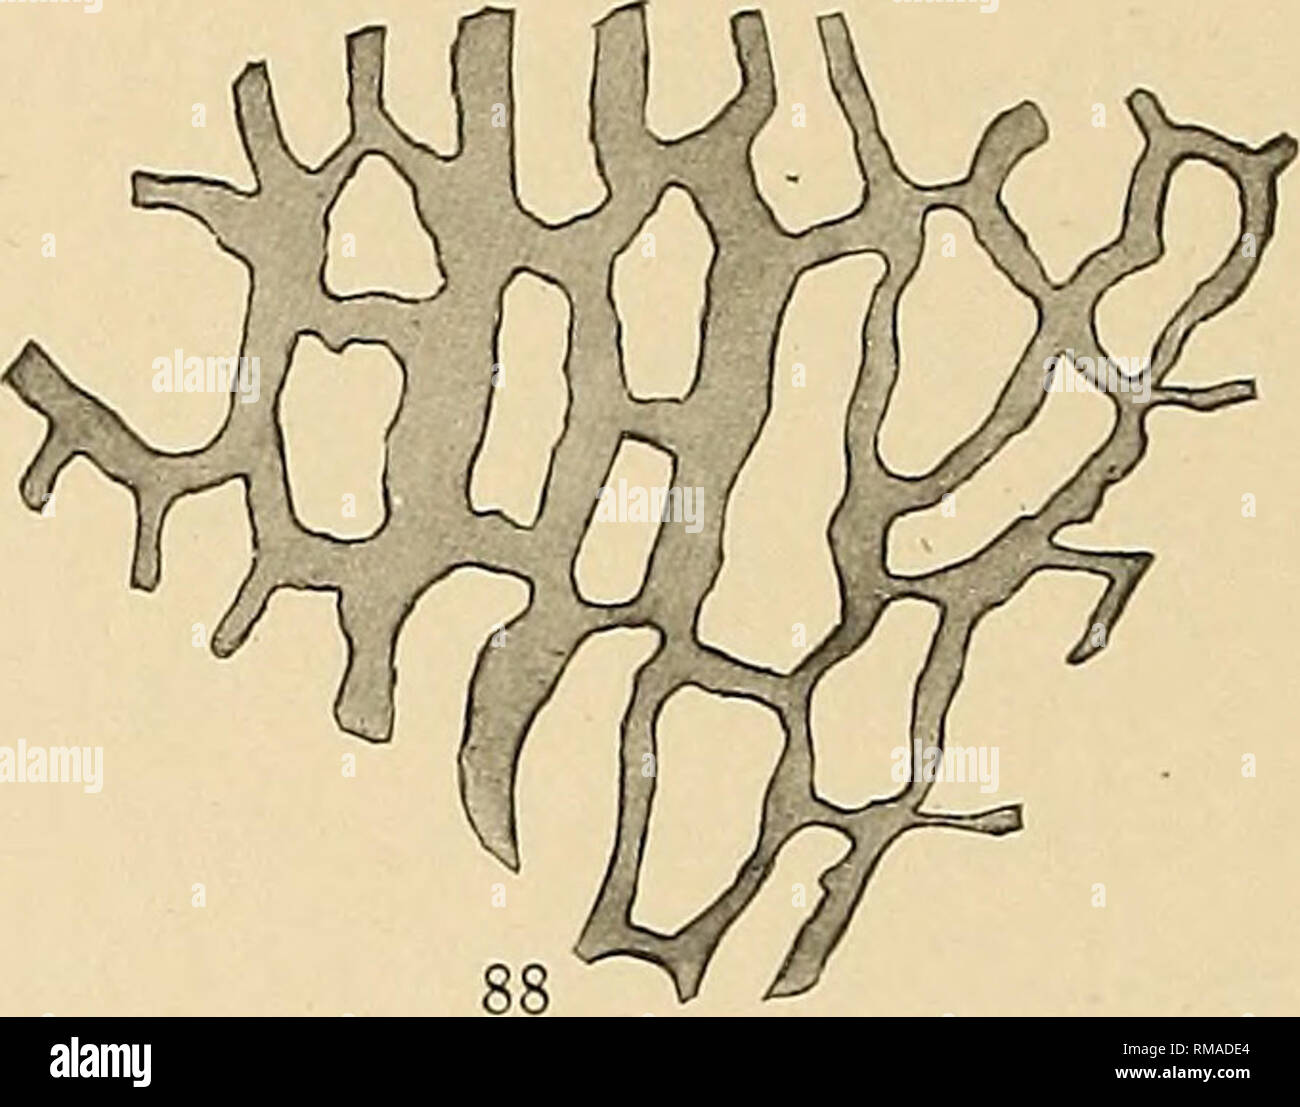 . Annual report. New York State Museum; Science; Science. Fig. 87, 88 Desmograptus vandelooi sp. nov. Enlargements (x 5) of portions of the type specimen showing different aspects of rhabdosome Like Desmograptus cadens, this species could be as well referred to Dictyonema as to Desmograptus ; and the final generic deter- mination of the two has to await the finding of complete rhabdosomes. cyclograptus Spencer' Spencer's description of this genus is as follows : In this genus, the frond consists of a circular disk which was probably cup-shaped in its growing form, though flattened in a concave Stock Photo